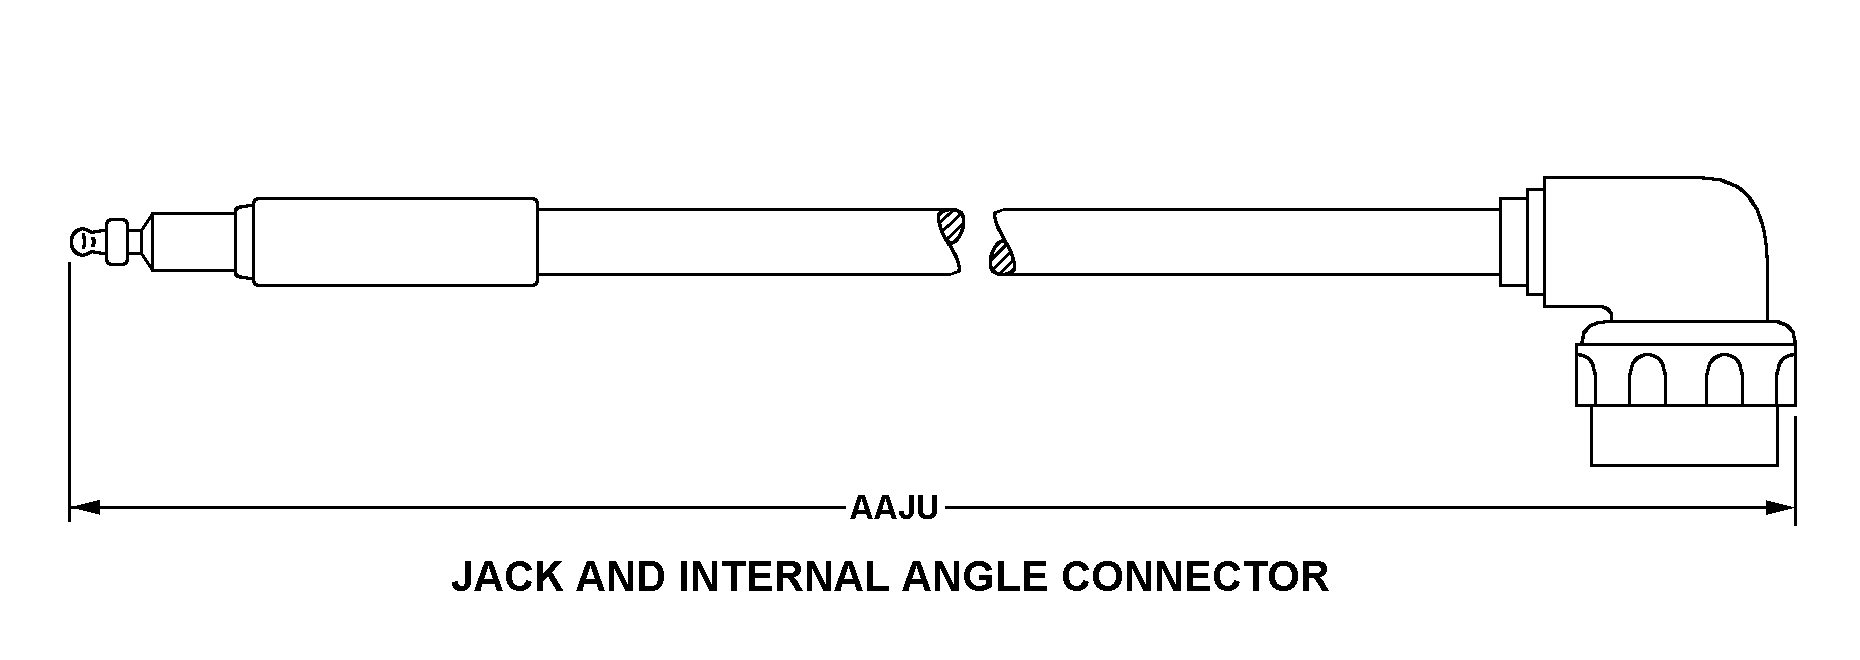 JACK AND INTERNAL ANGLE CONNECTOR style nsn 5995-01-327-7065